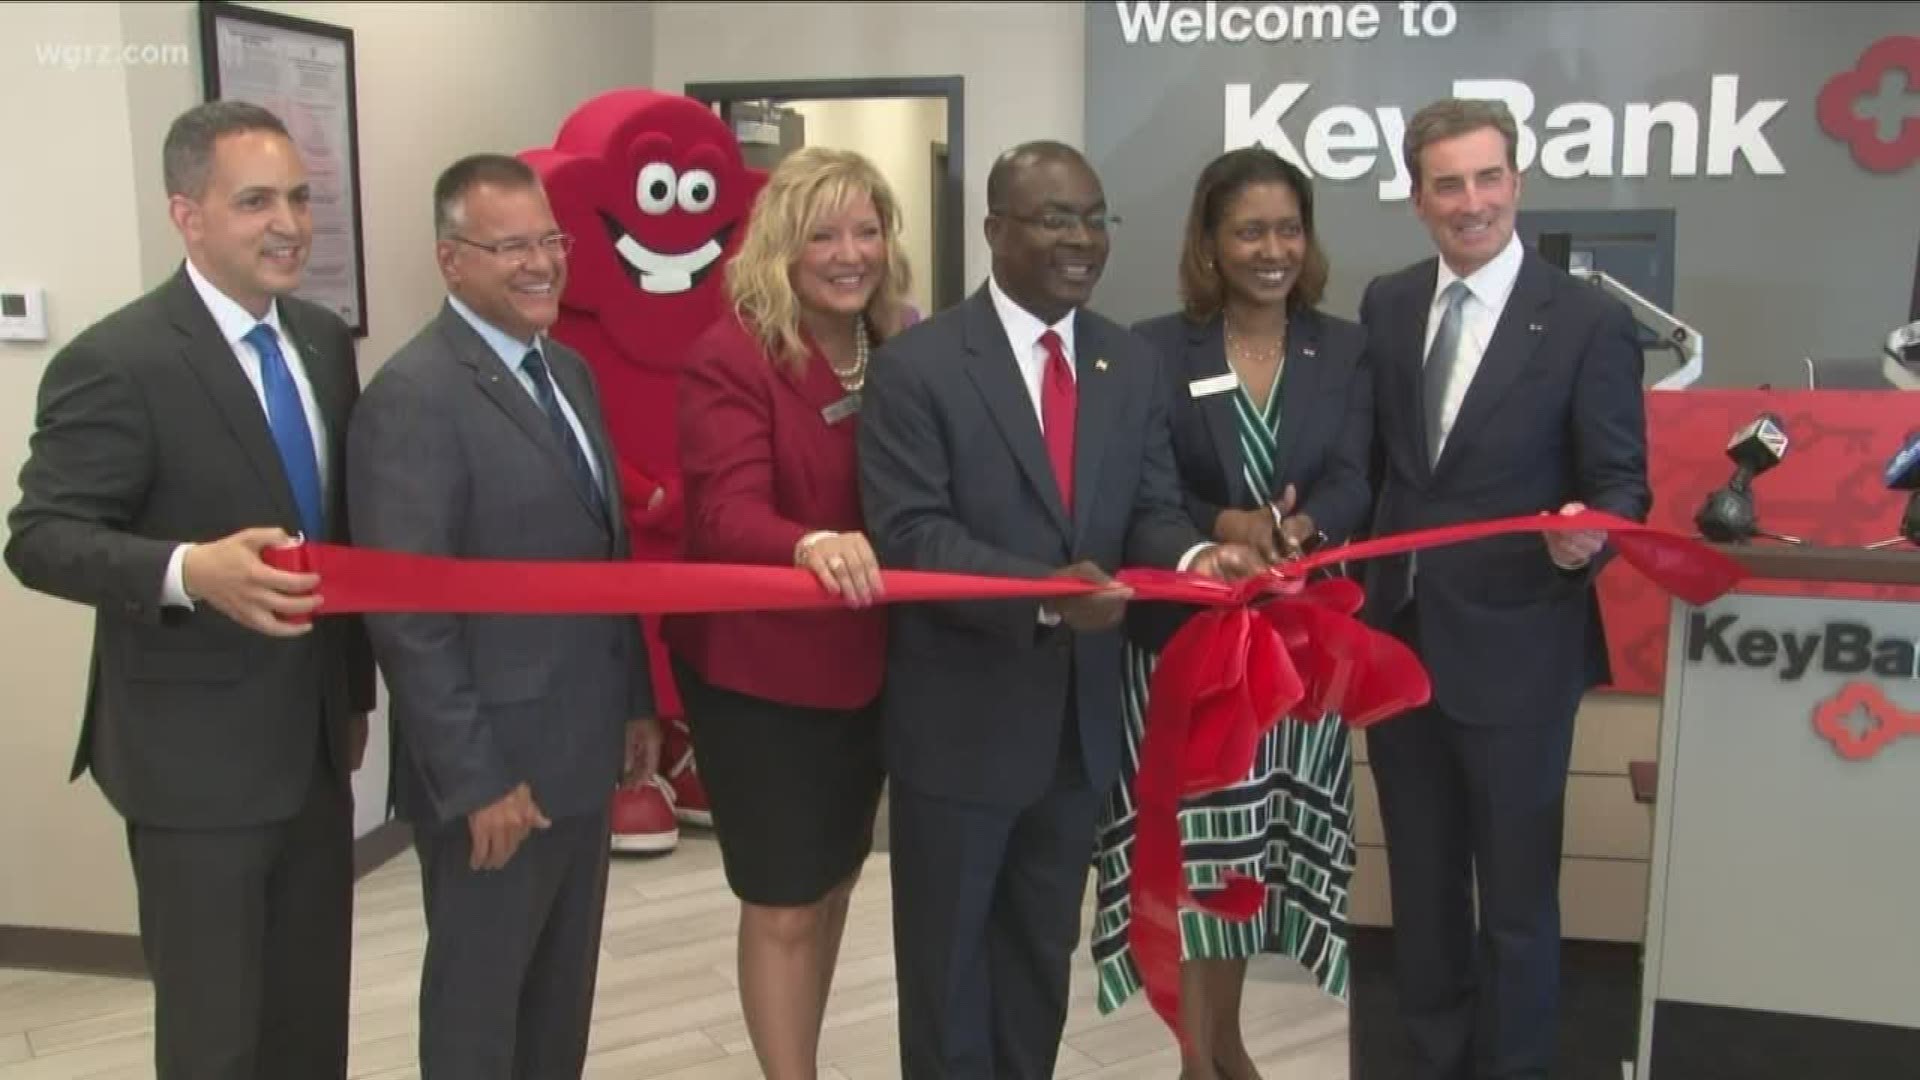 Key bank opens new branch on East side